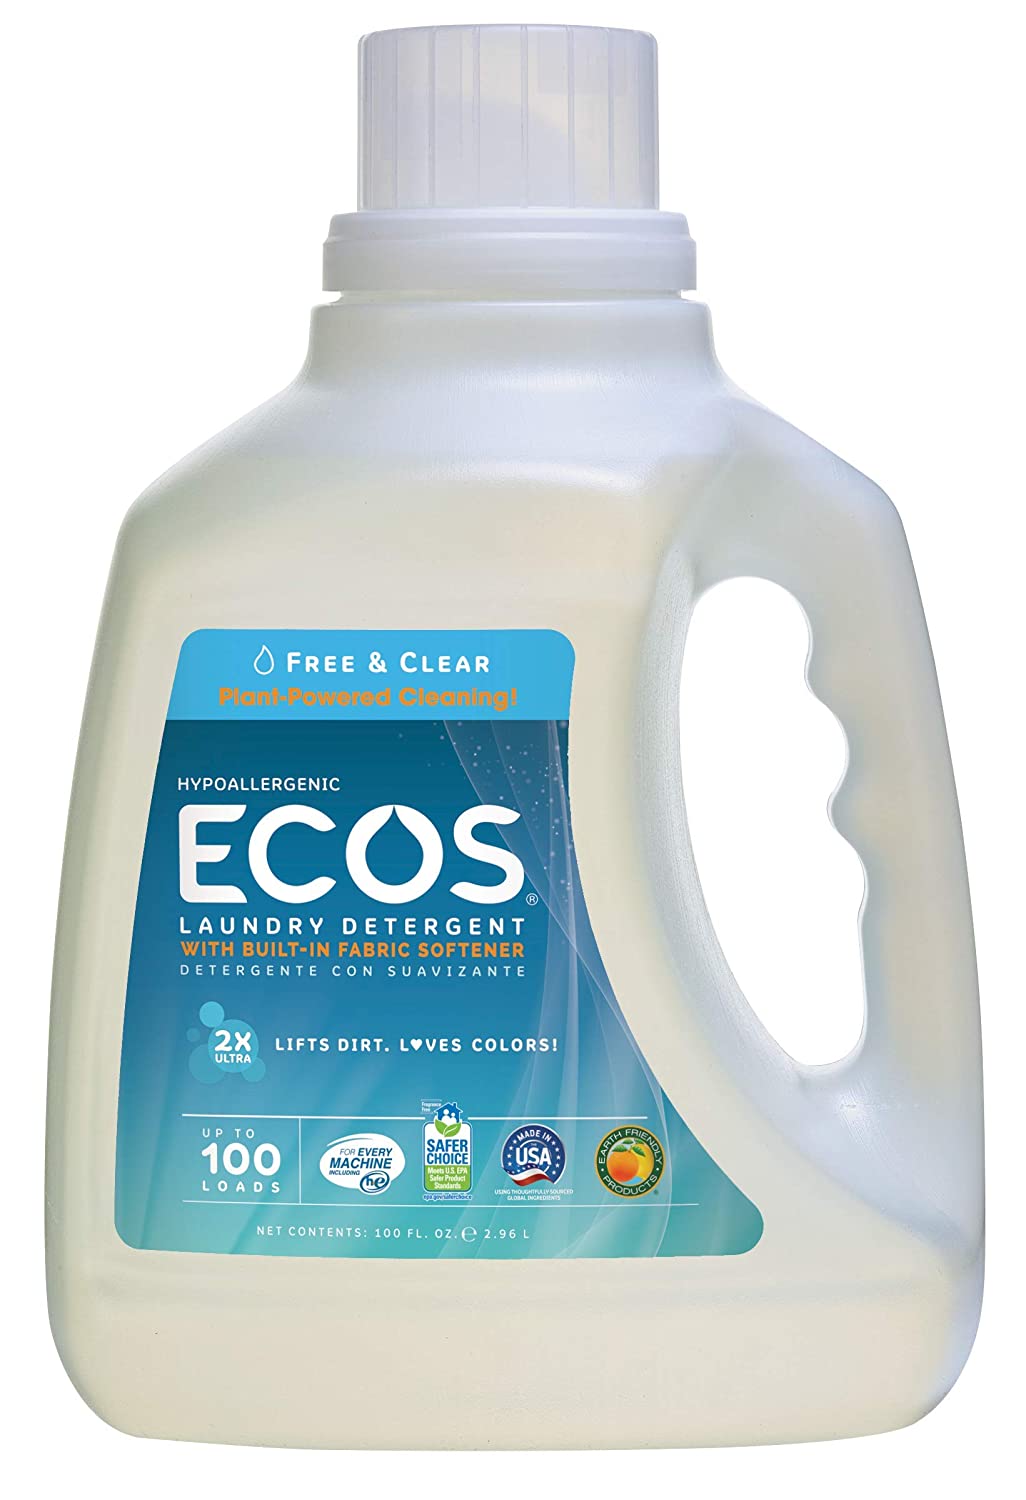 ECOS, Hypoallergenic Laundry Detergent, Free & Clear, 100 oz